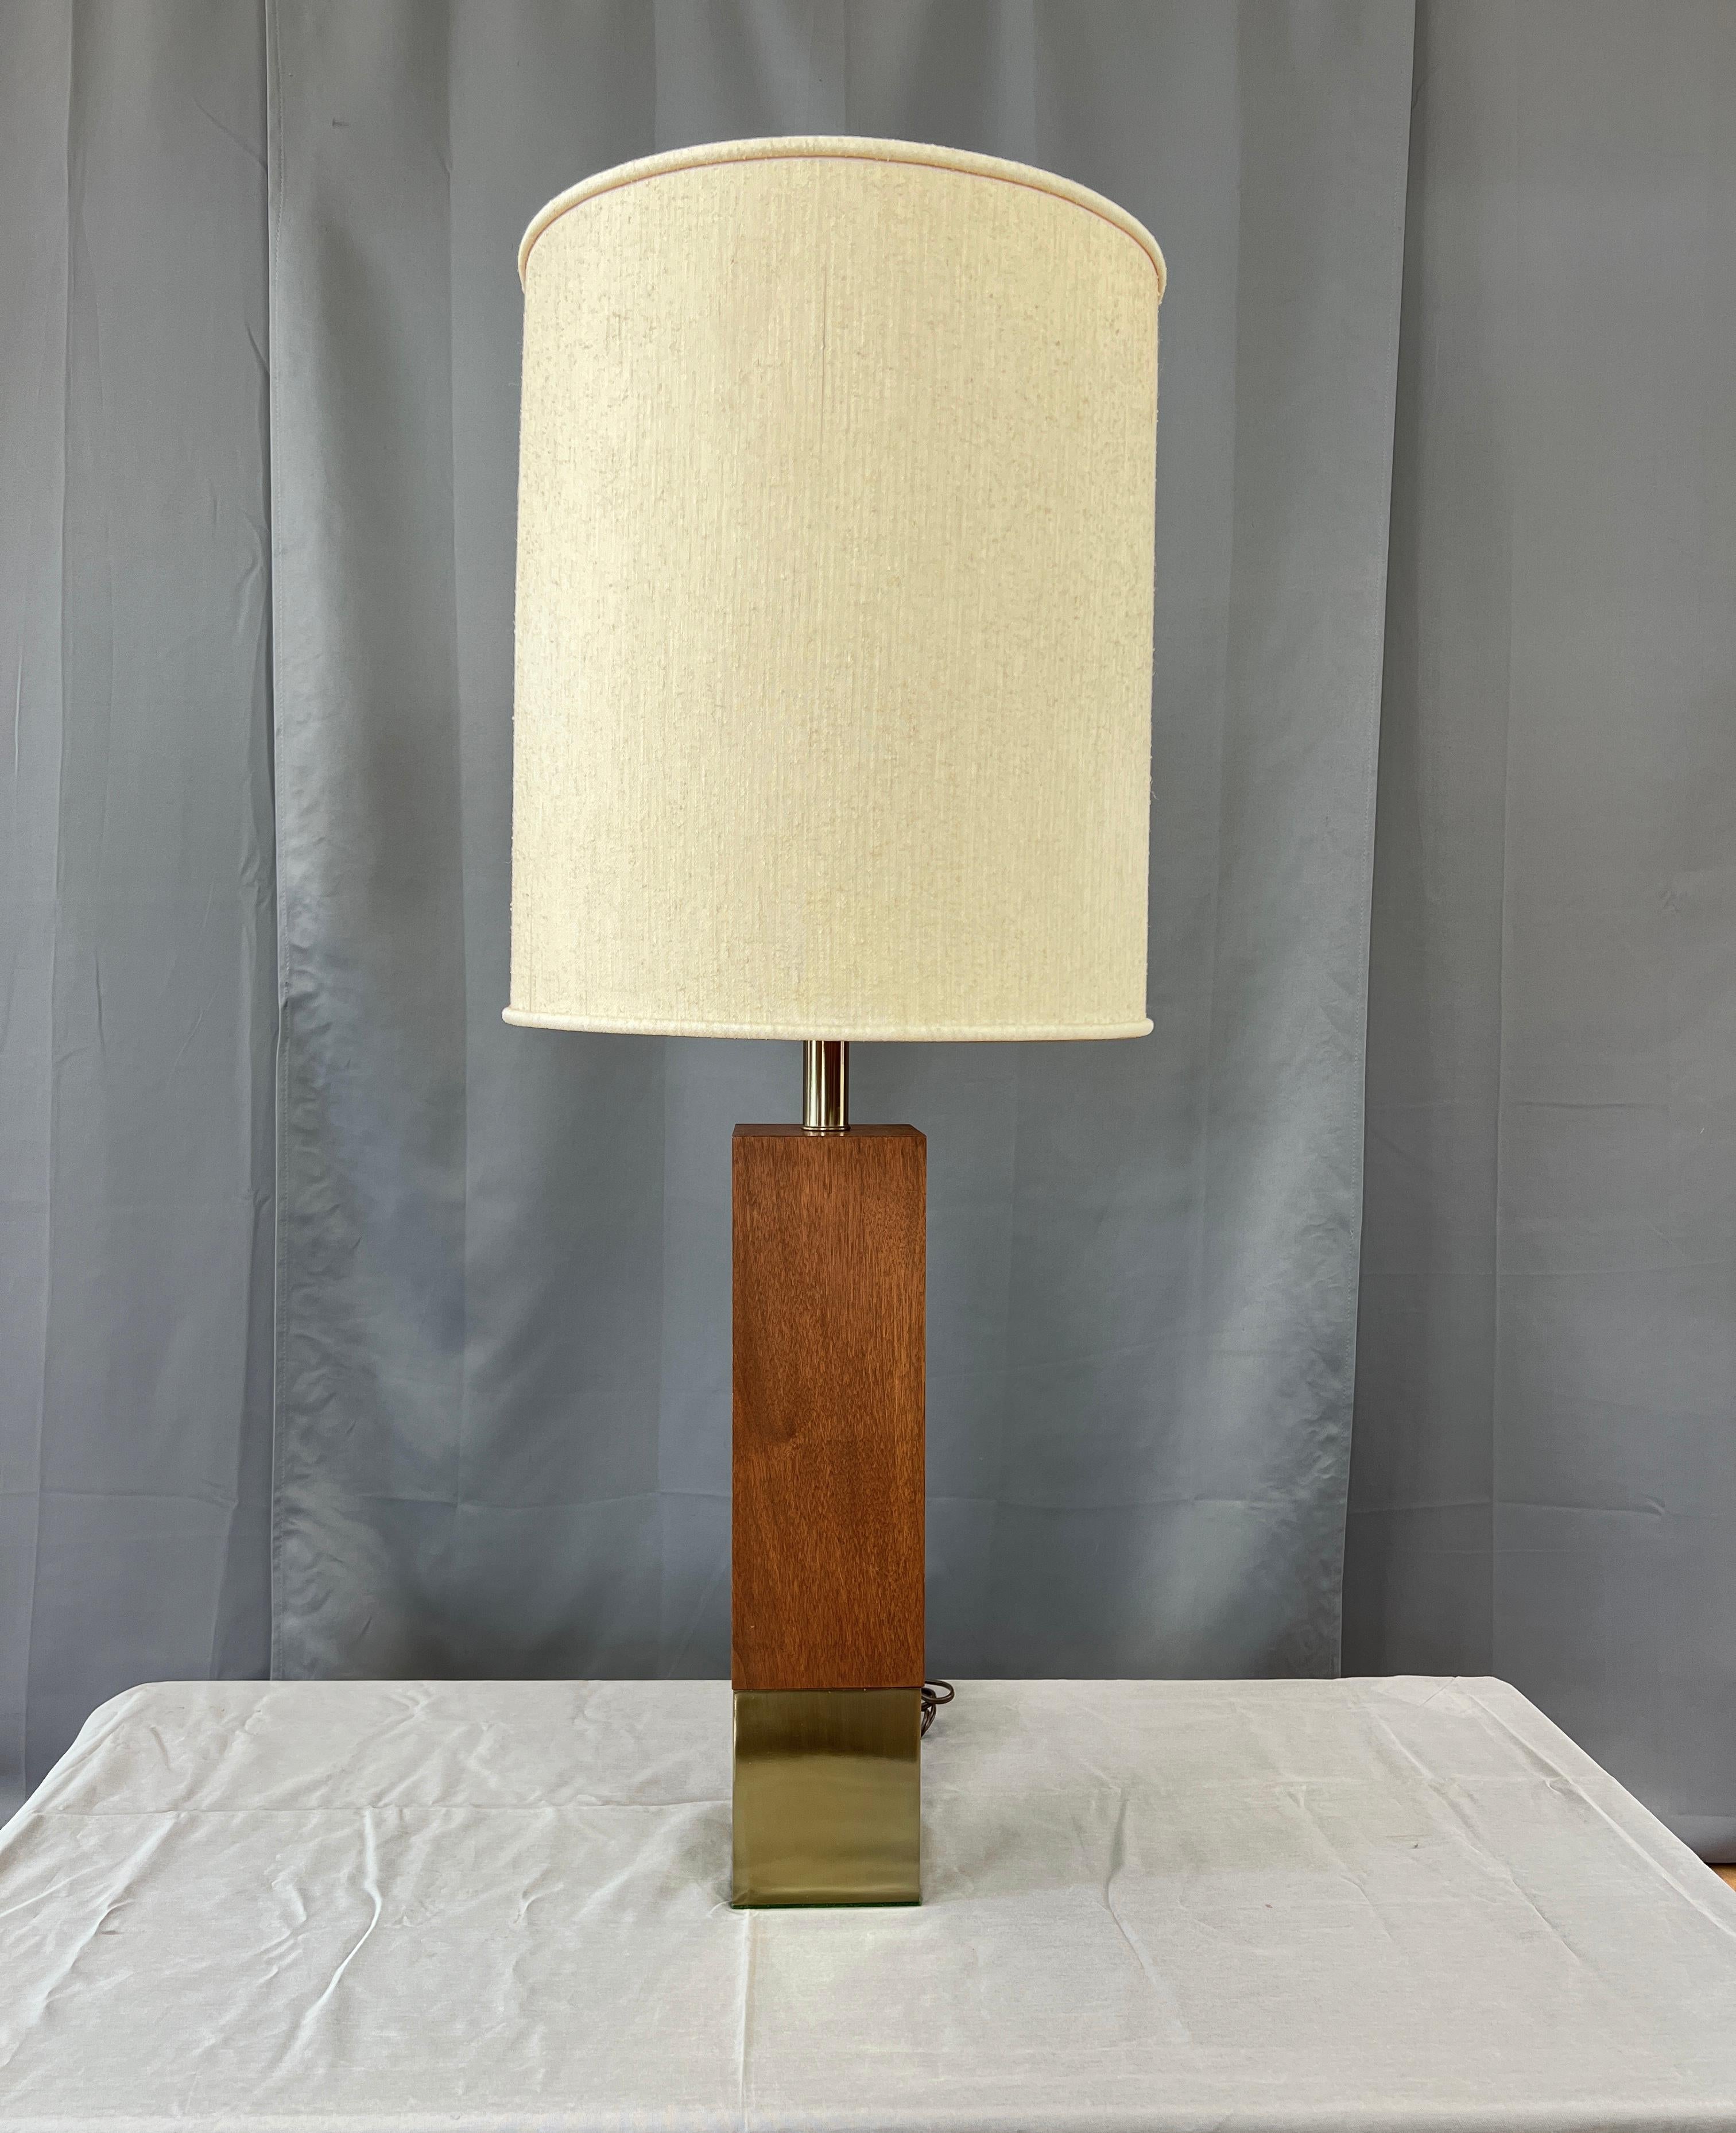 A monumental table lamp in walnut and brass color by Laurel Lamp Co. 
This large lamp starts with a colored brass metal base then continues with beautiful Walnut.
Has a long cord, and a newer light socket.

Measurements below are to the socket,